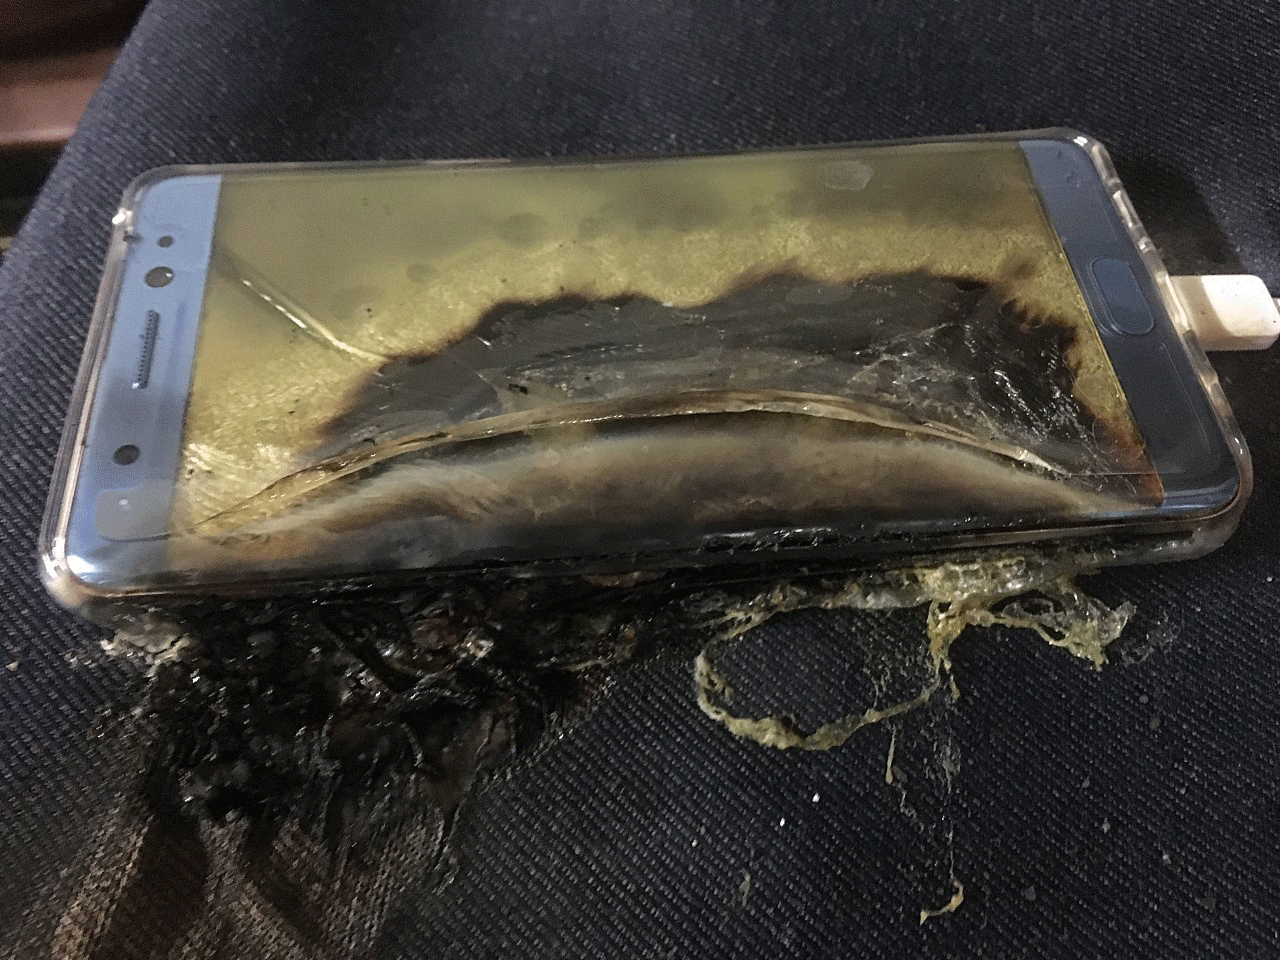 Samsung Galaxy Note 7 banned from all Lufthansa flights